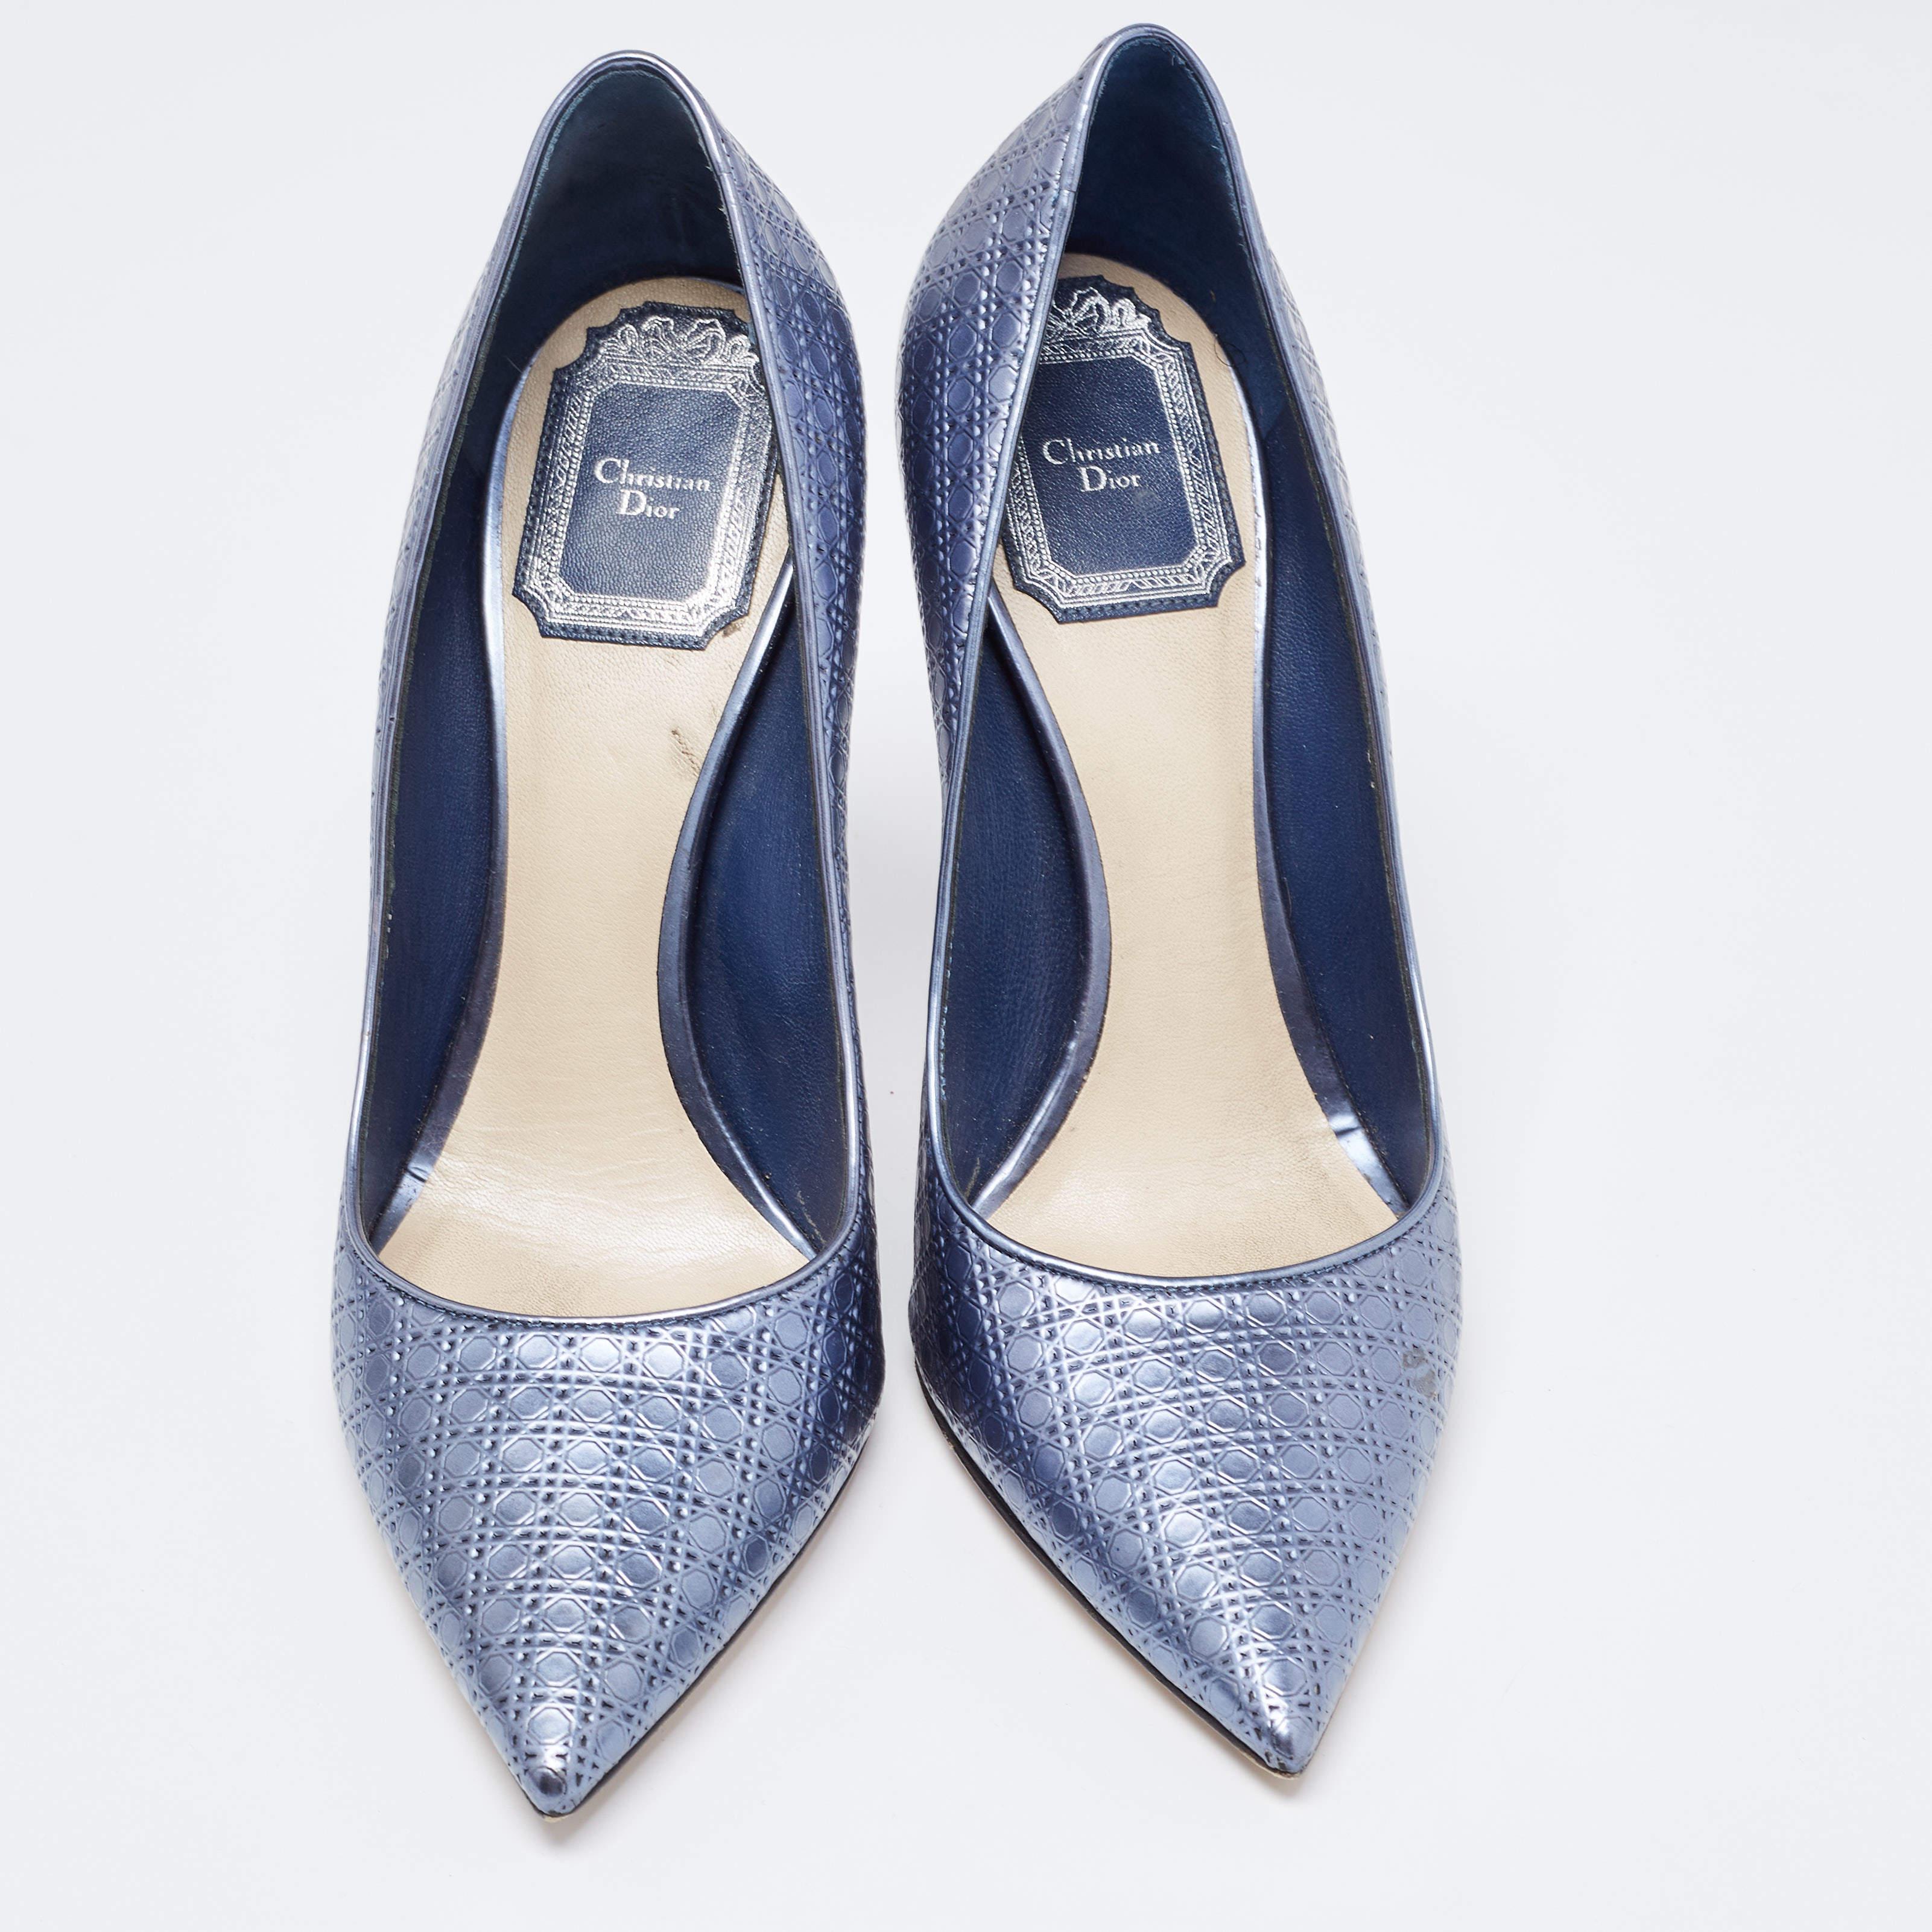 Crafted in a classy hue, we love these Dior pumps. Designed to make a statement, they have a sleek silhouette and a nice fit. Wear yours under maxi skirts for a peek of glamour, or let them shine with cropped hemlines.

